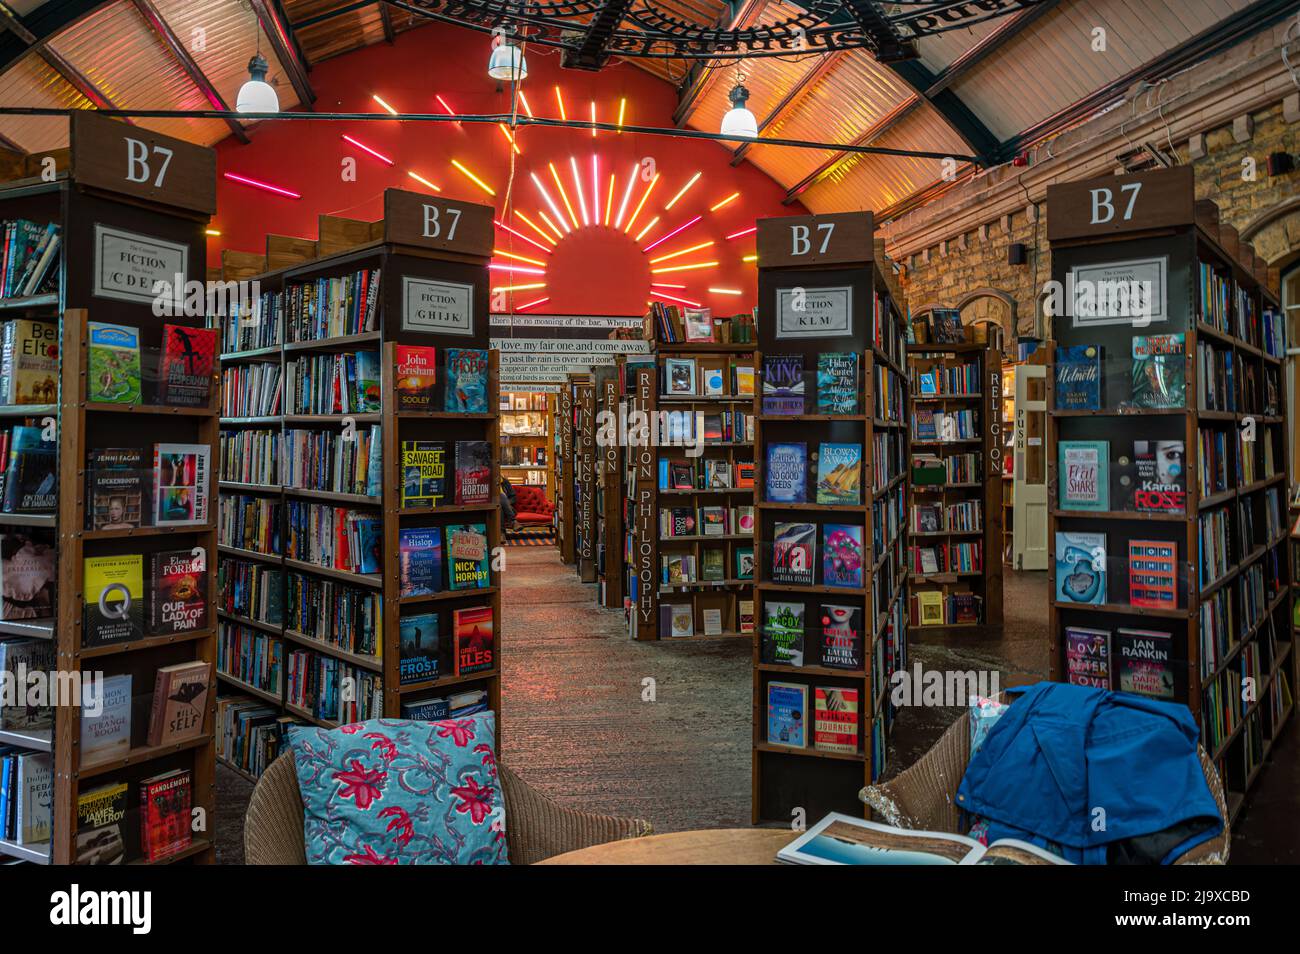 Rows of secondhand books for sale at Barter books, Alnwick, Northumberland, UK Stock Photo